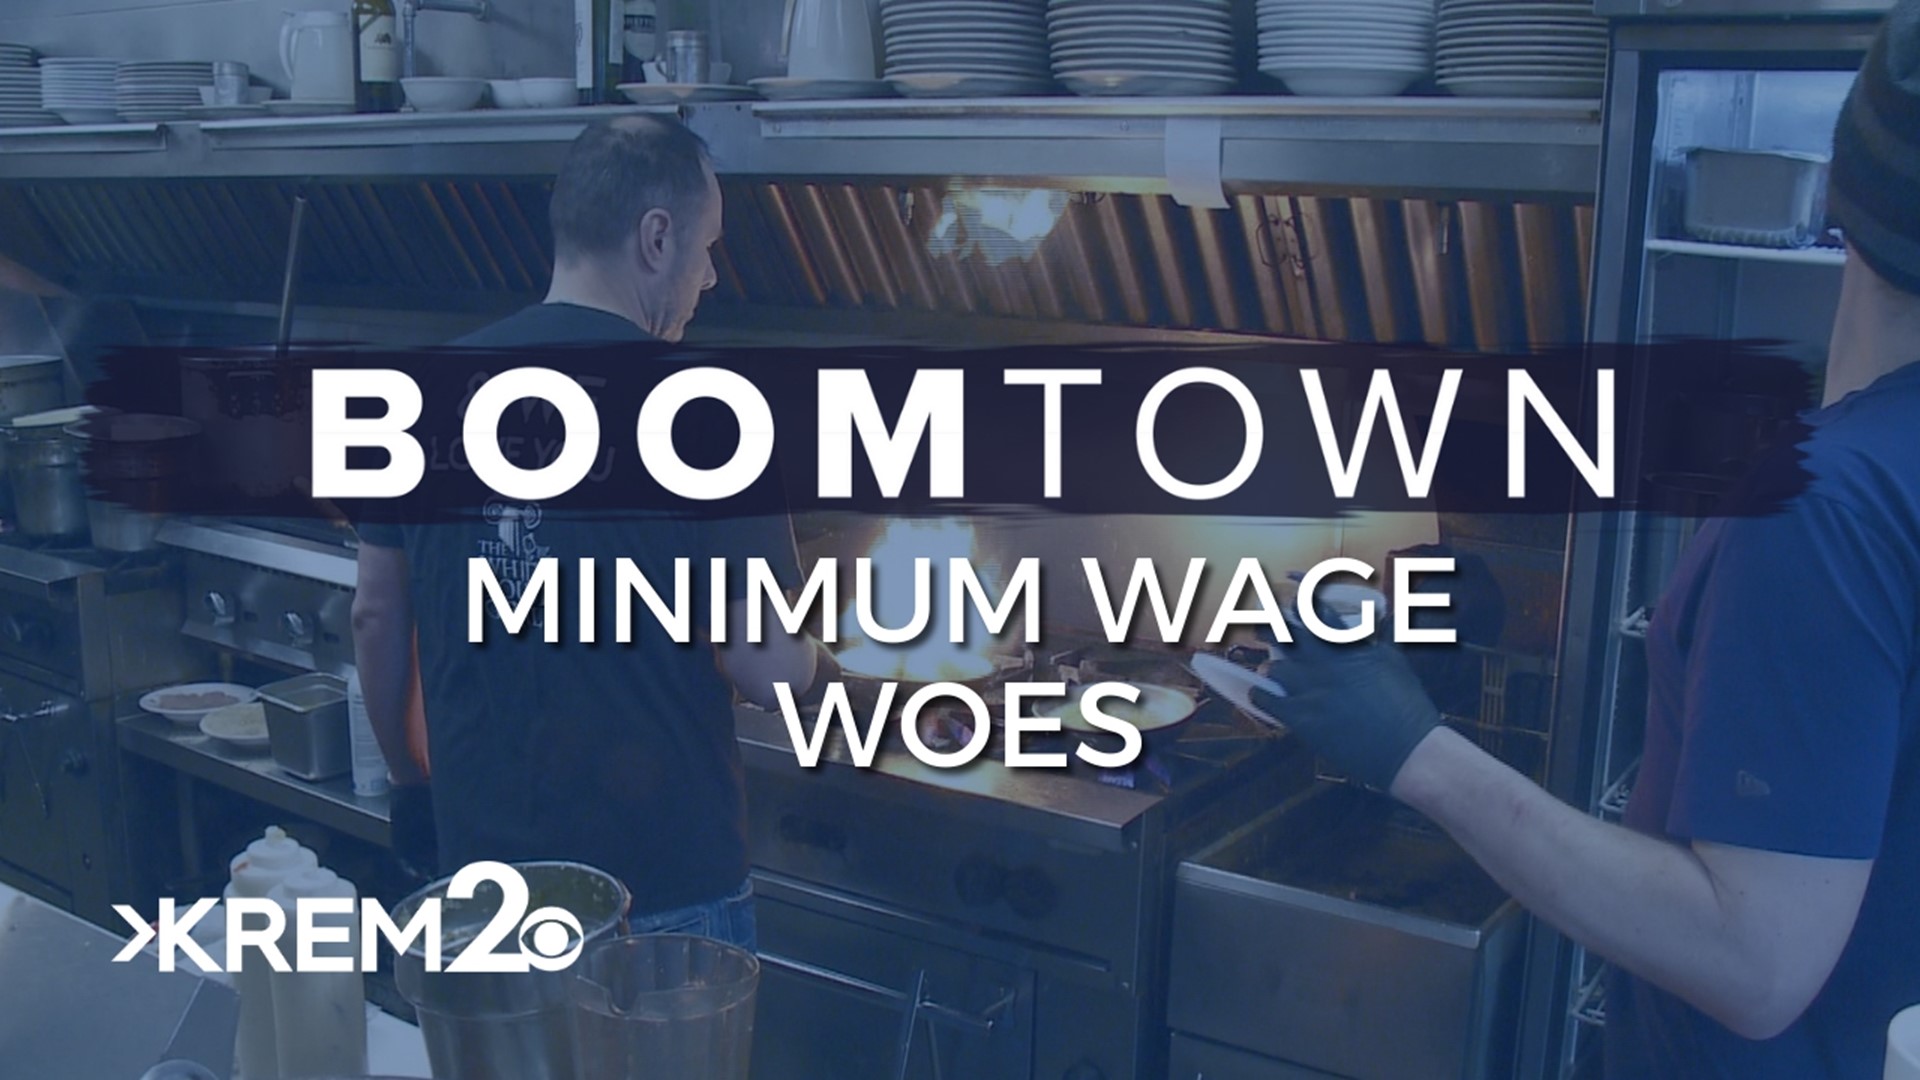 Idaho minimum wage has not changed since 2009 which comes with labor shortages and issues.